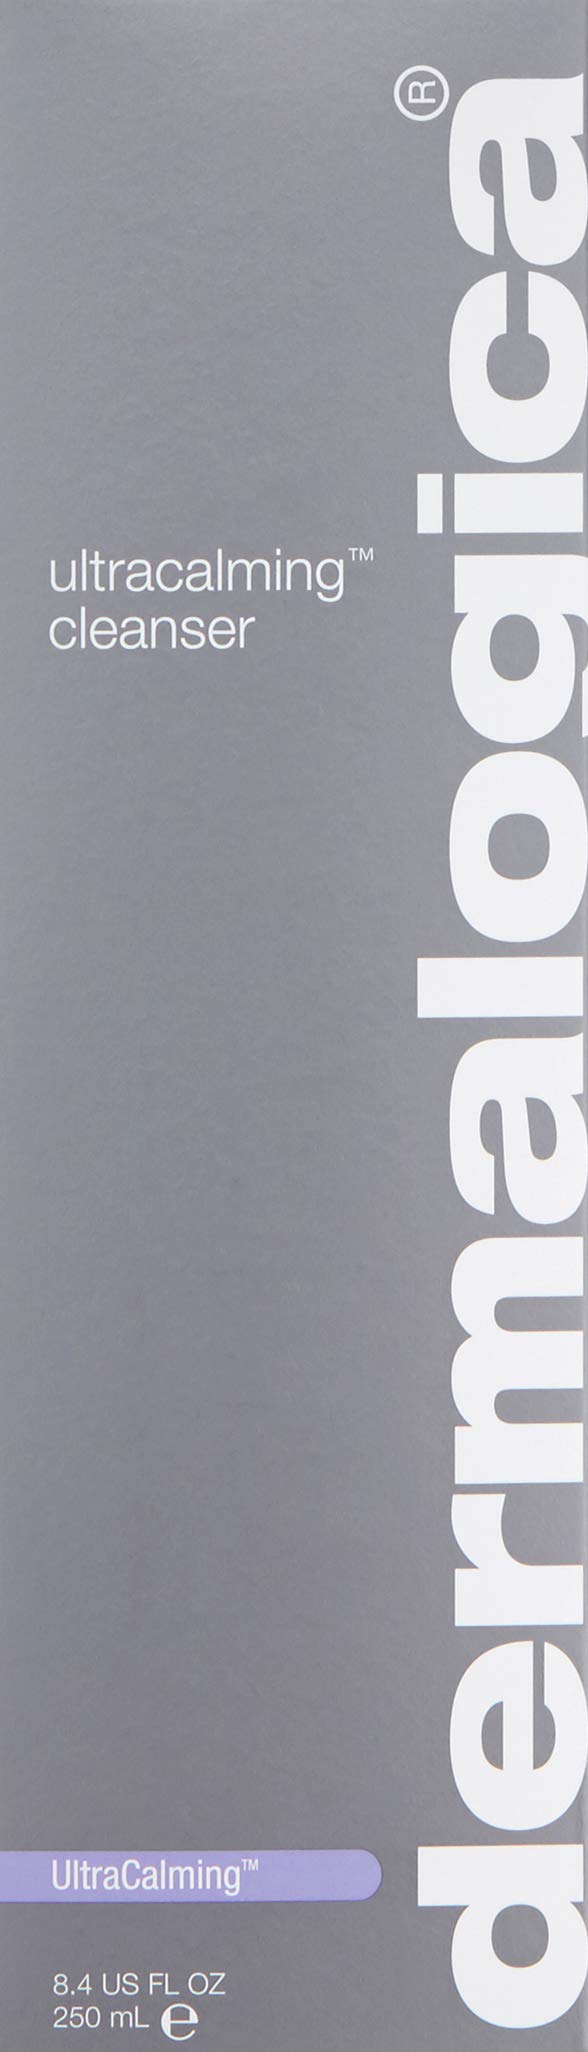 Dermalogica Ultracalming Cleanser - Gentle Non-Foaming Face Wash for Sensitive Skin - No Artificial Fragrances or Colors